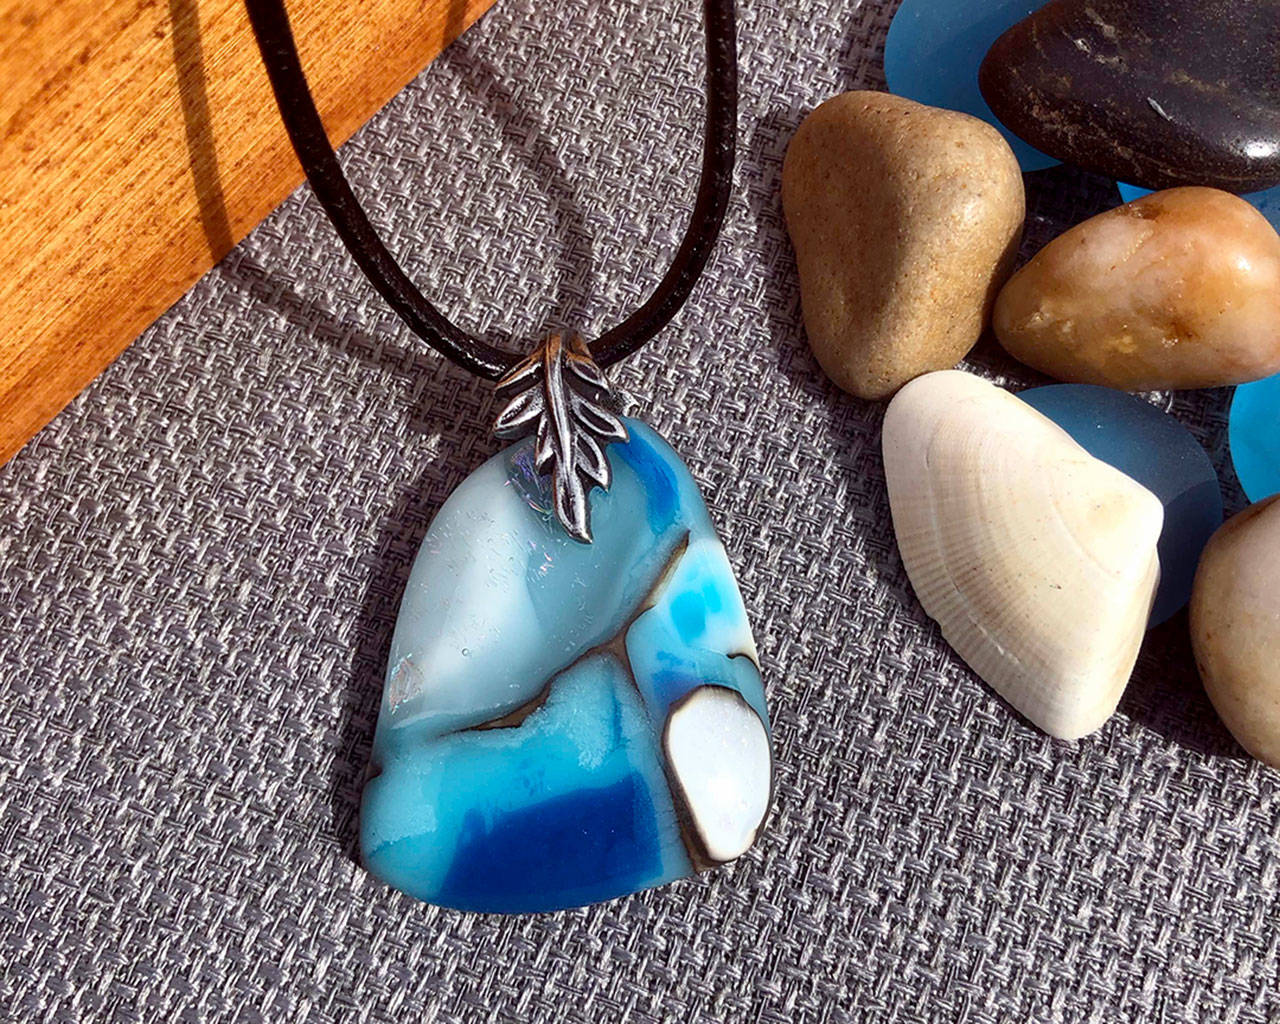 Necklaces by Mara Mauch, Pamela Raine and Linda Henderson will be part of the Port Ludlow Art League’s show of Artists of the Month, which include seven jewelers. (Mara Mauch)